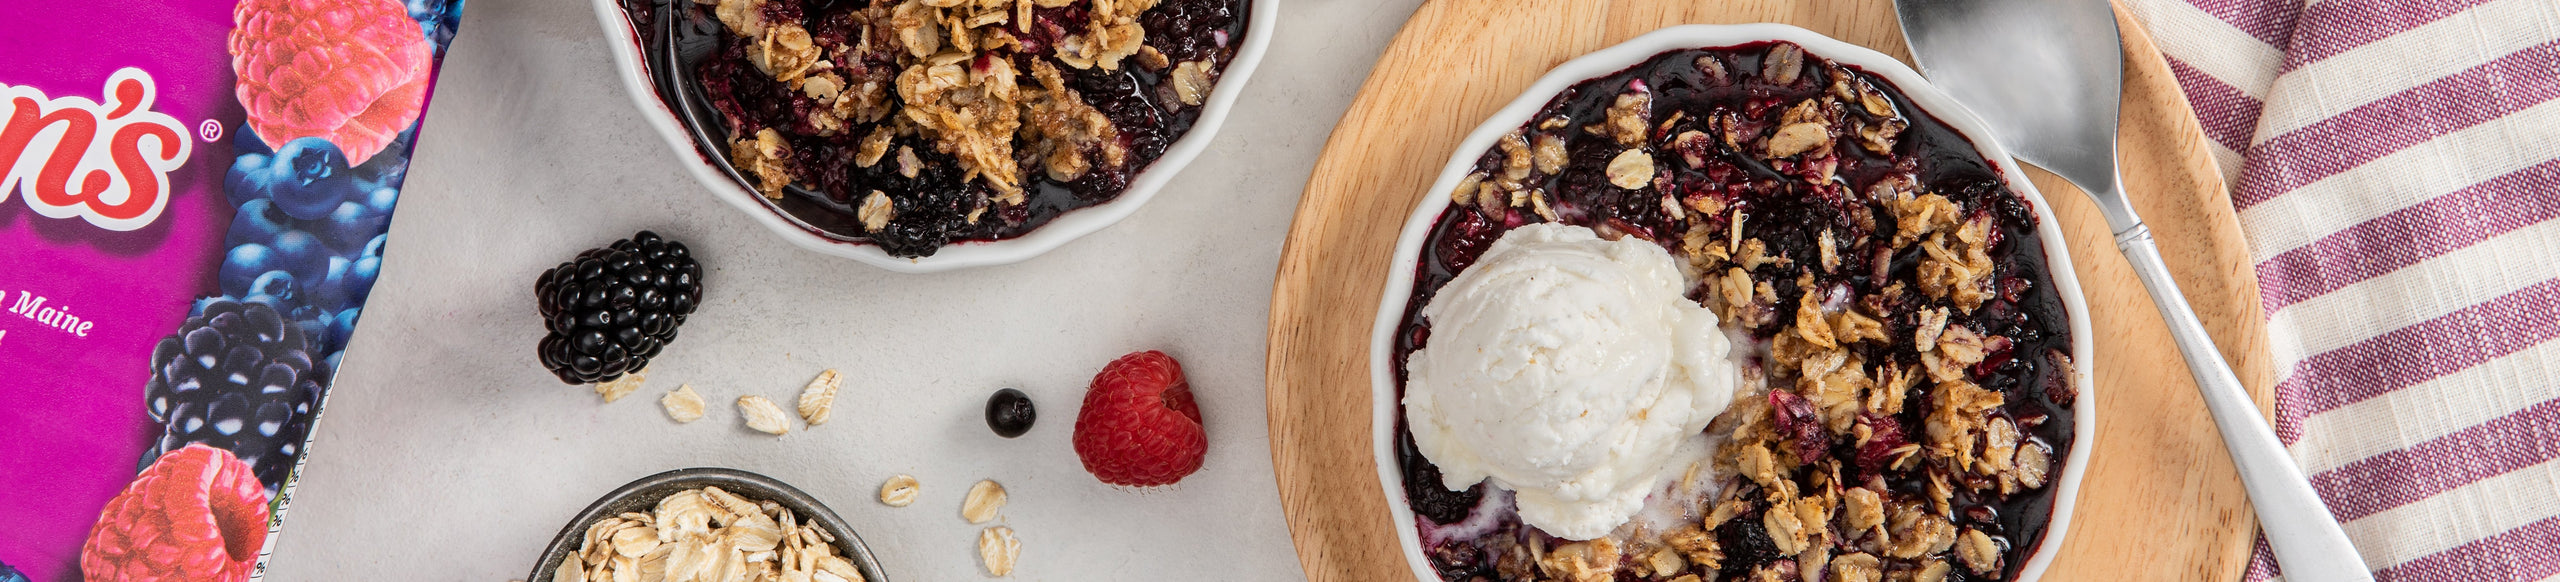 Two bowls of granola and berries on a table.